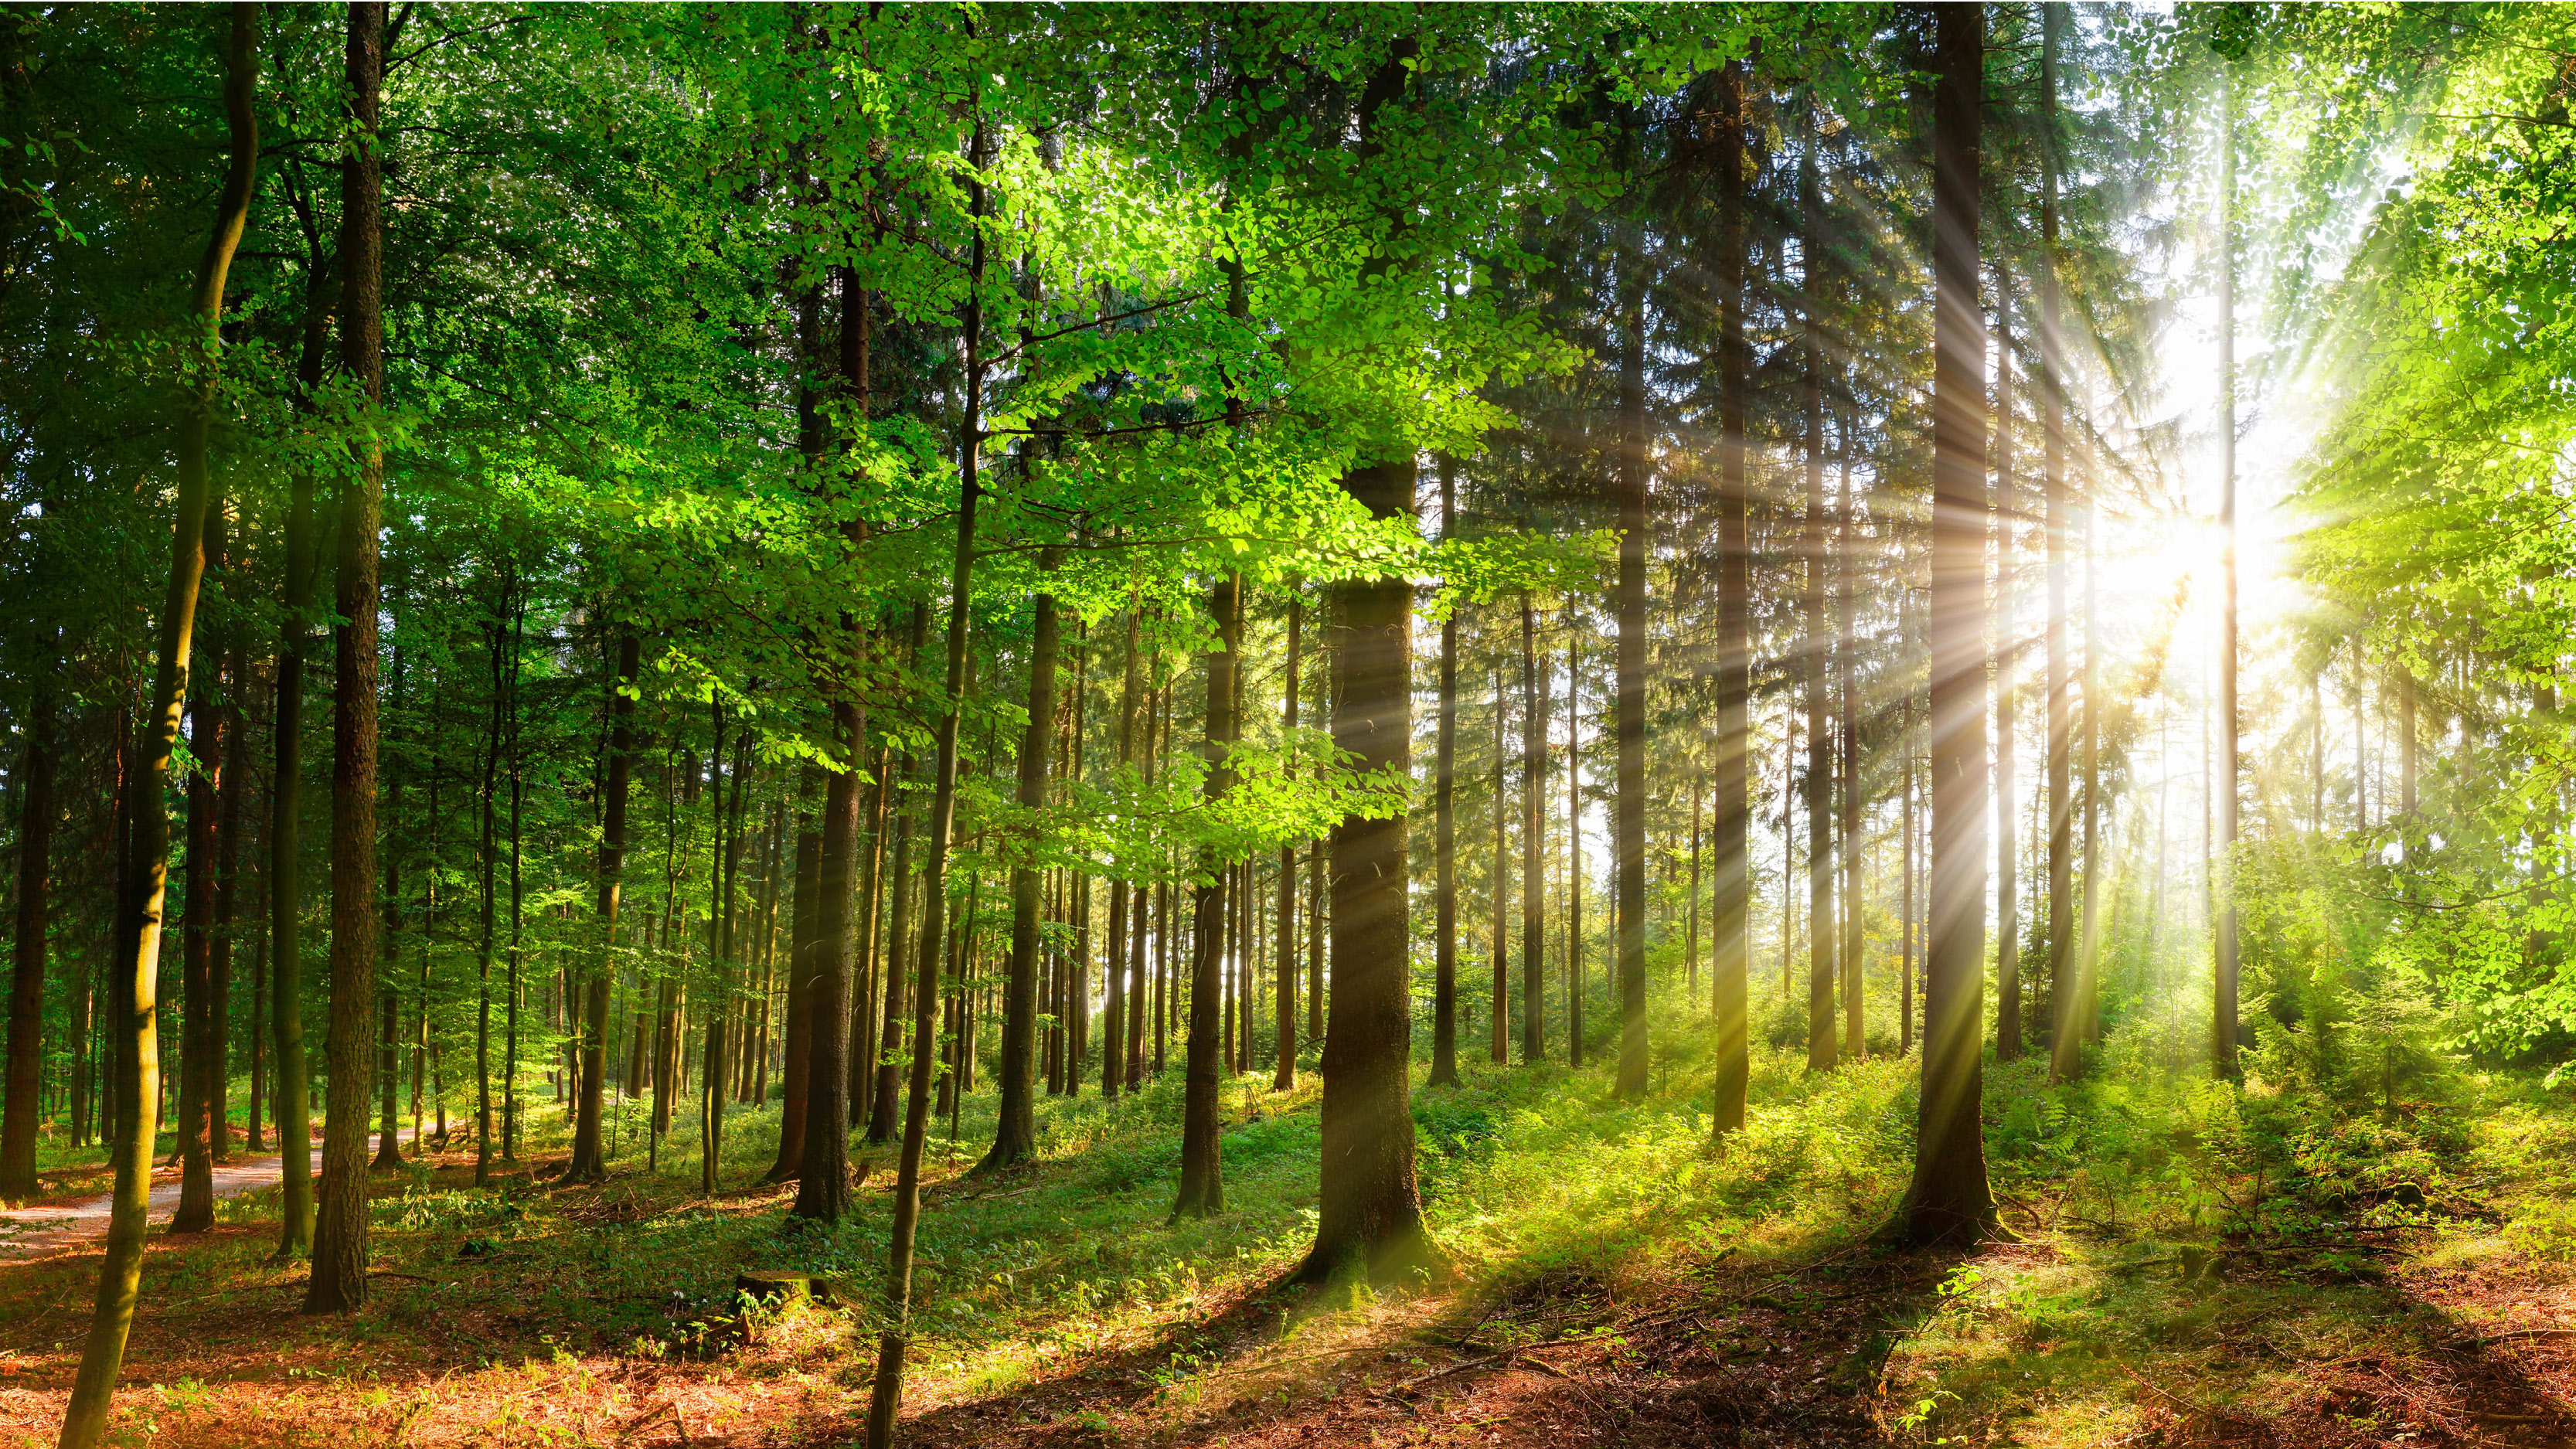 A forest with sunlight filtering through the trees